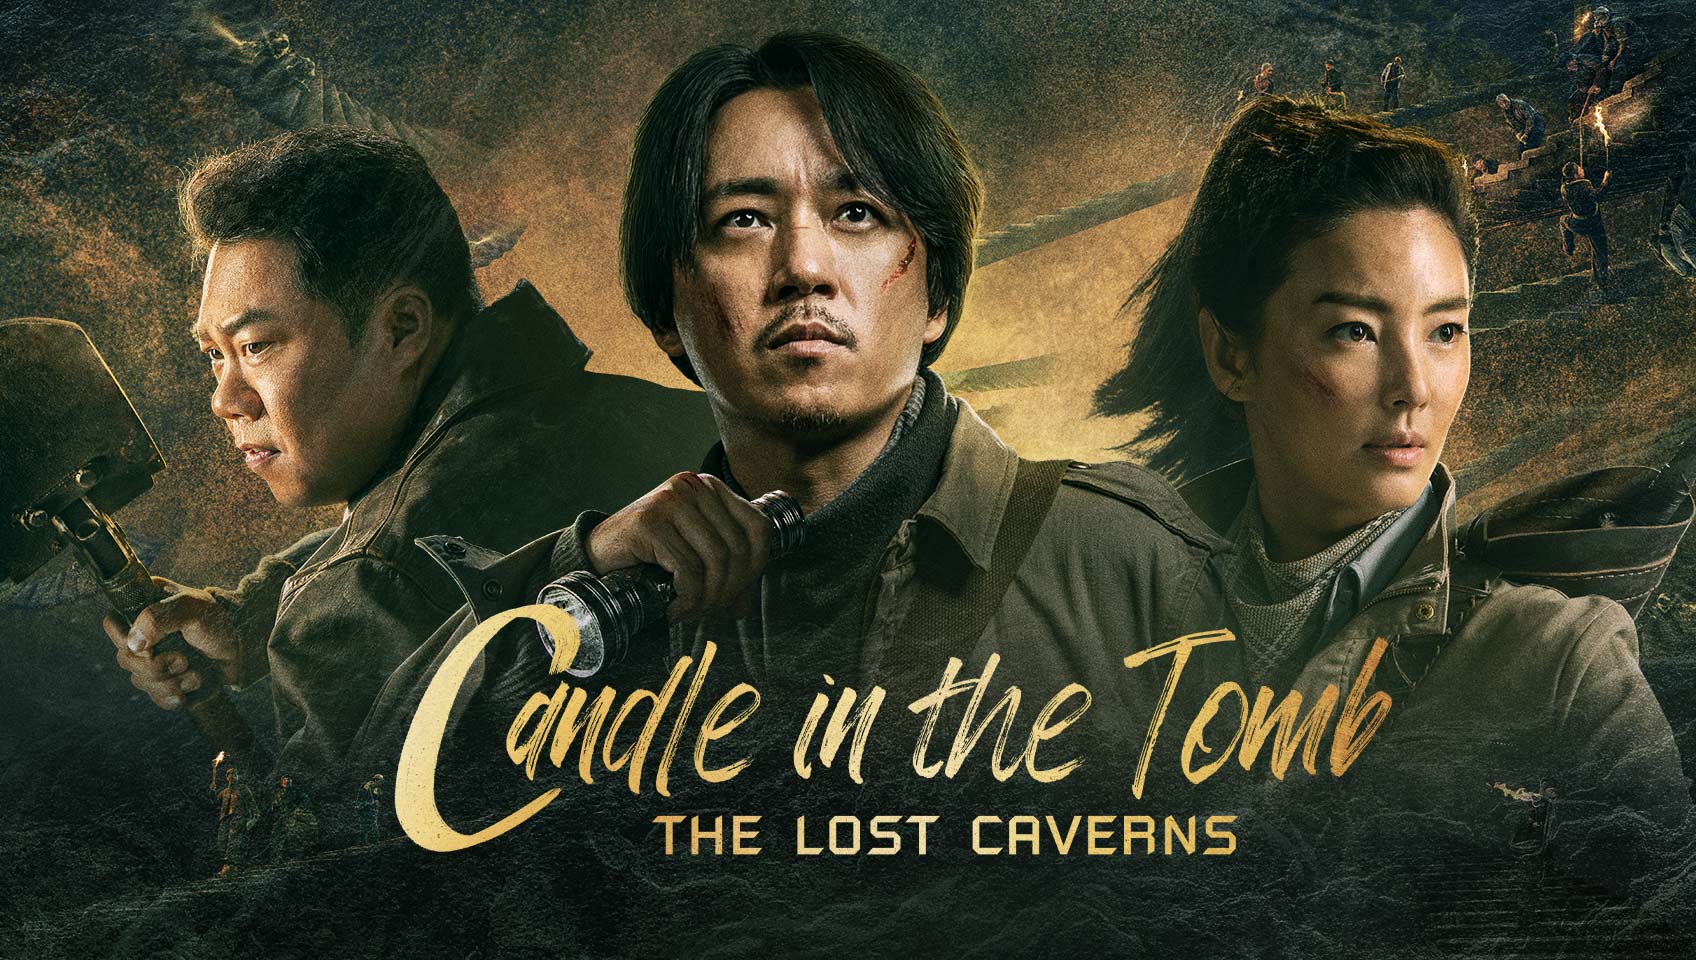 Candle in the Tomb: The Lost Caverns